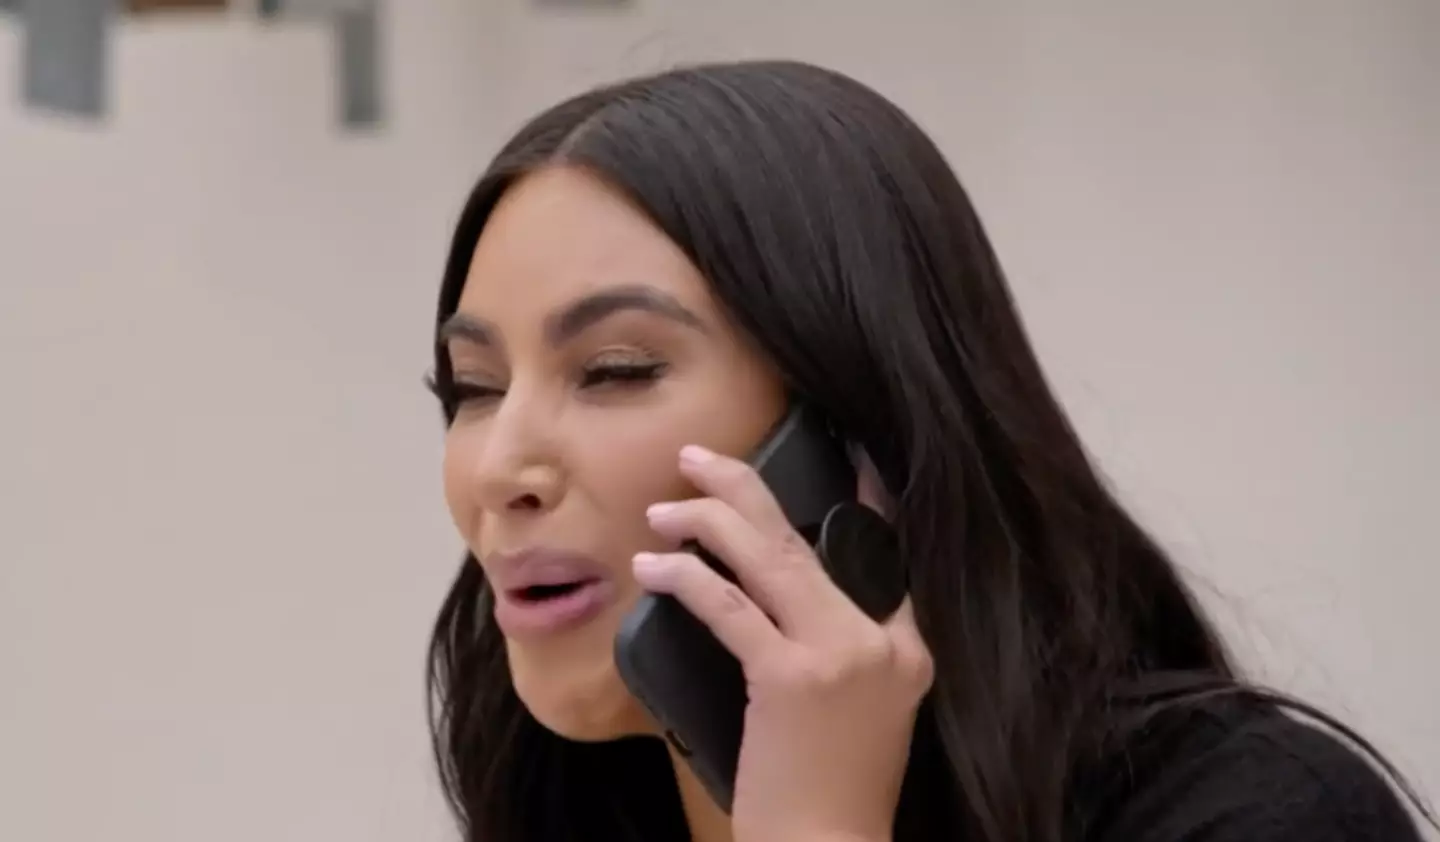 Kim Kardashian previously discussed the sex tape controversy on a recent episode of the Hulu show.